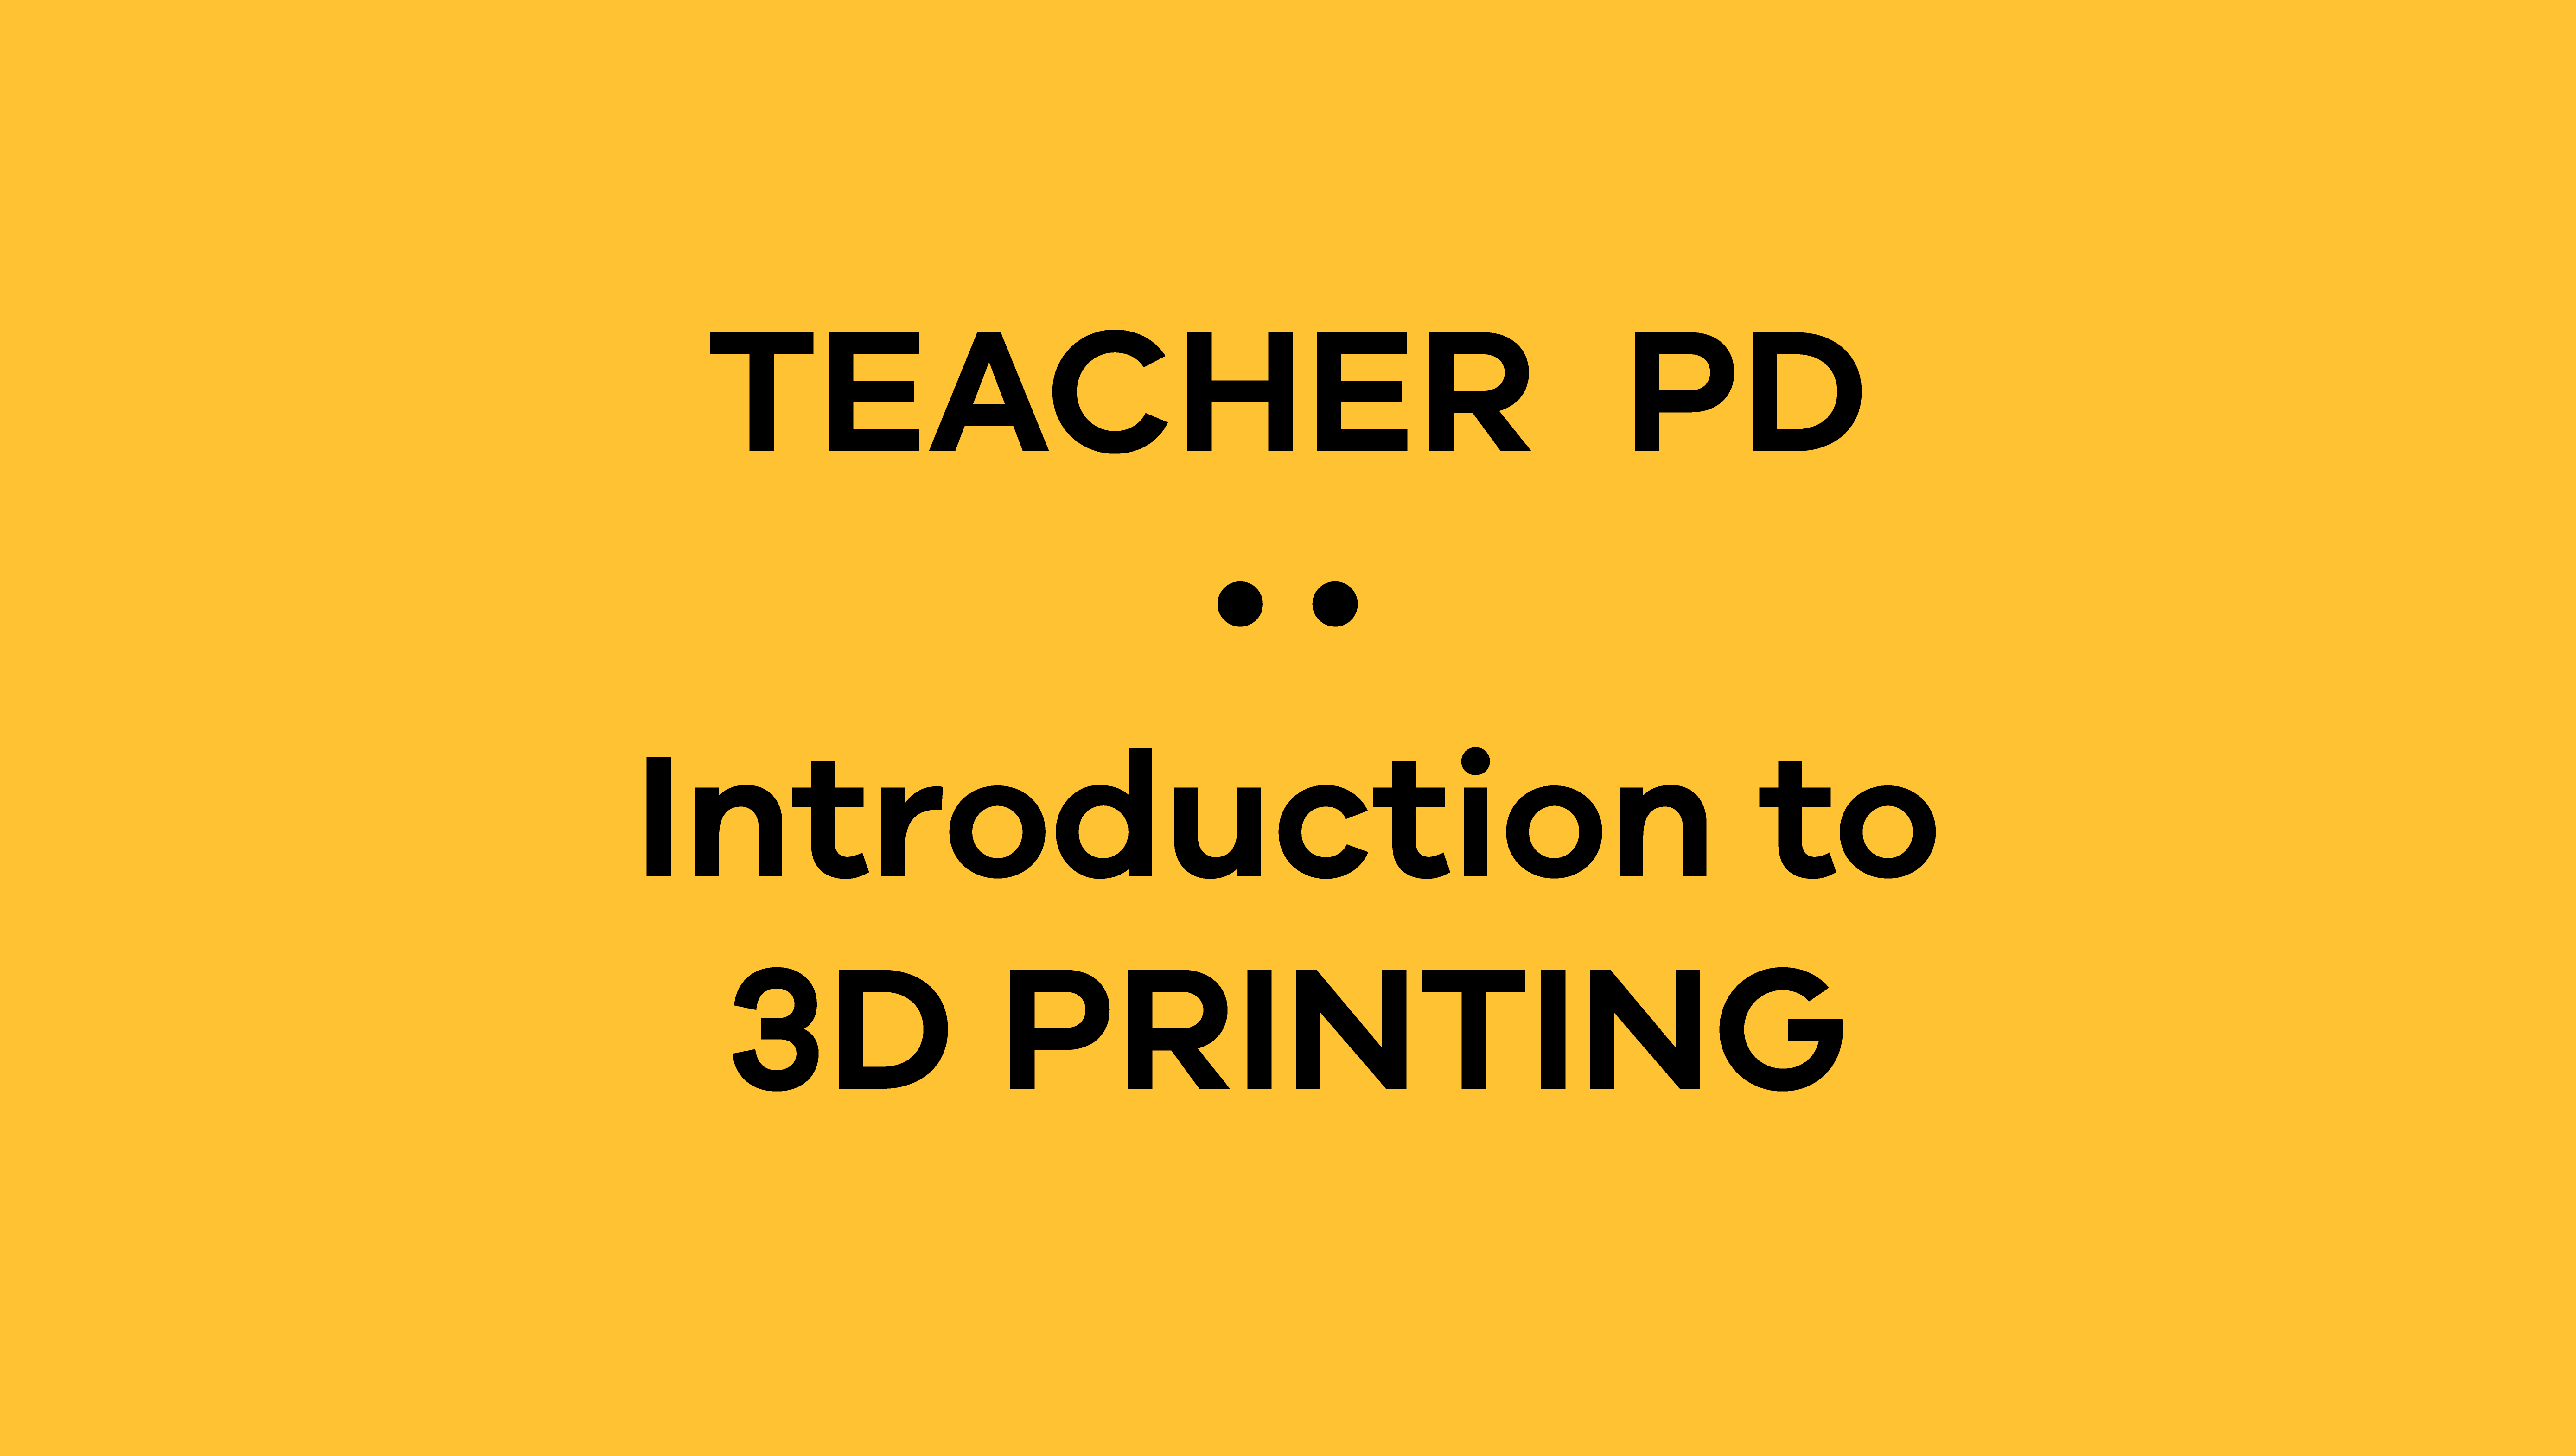 Introduction to: 3D PRINTING